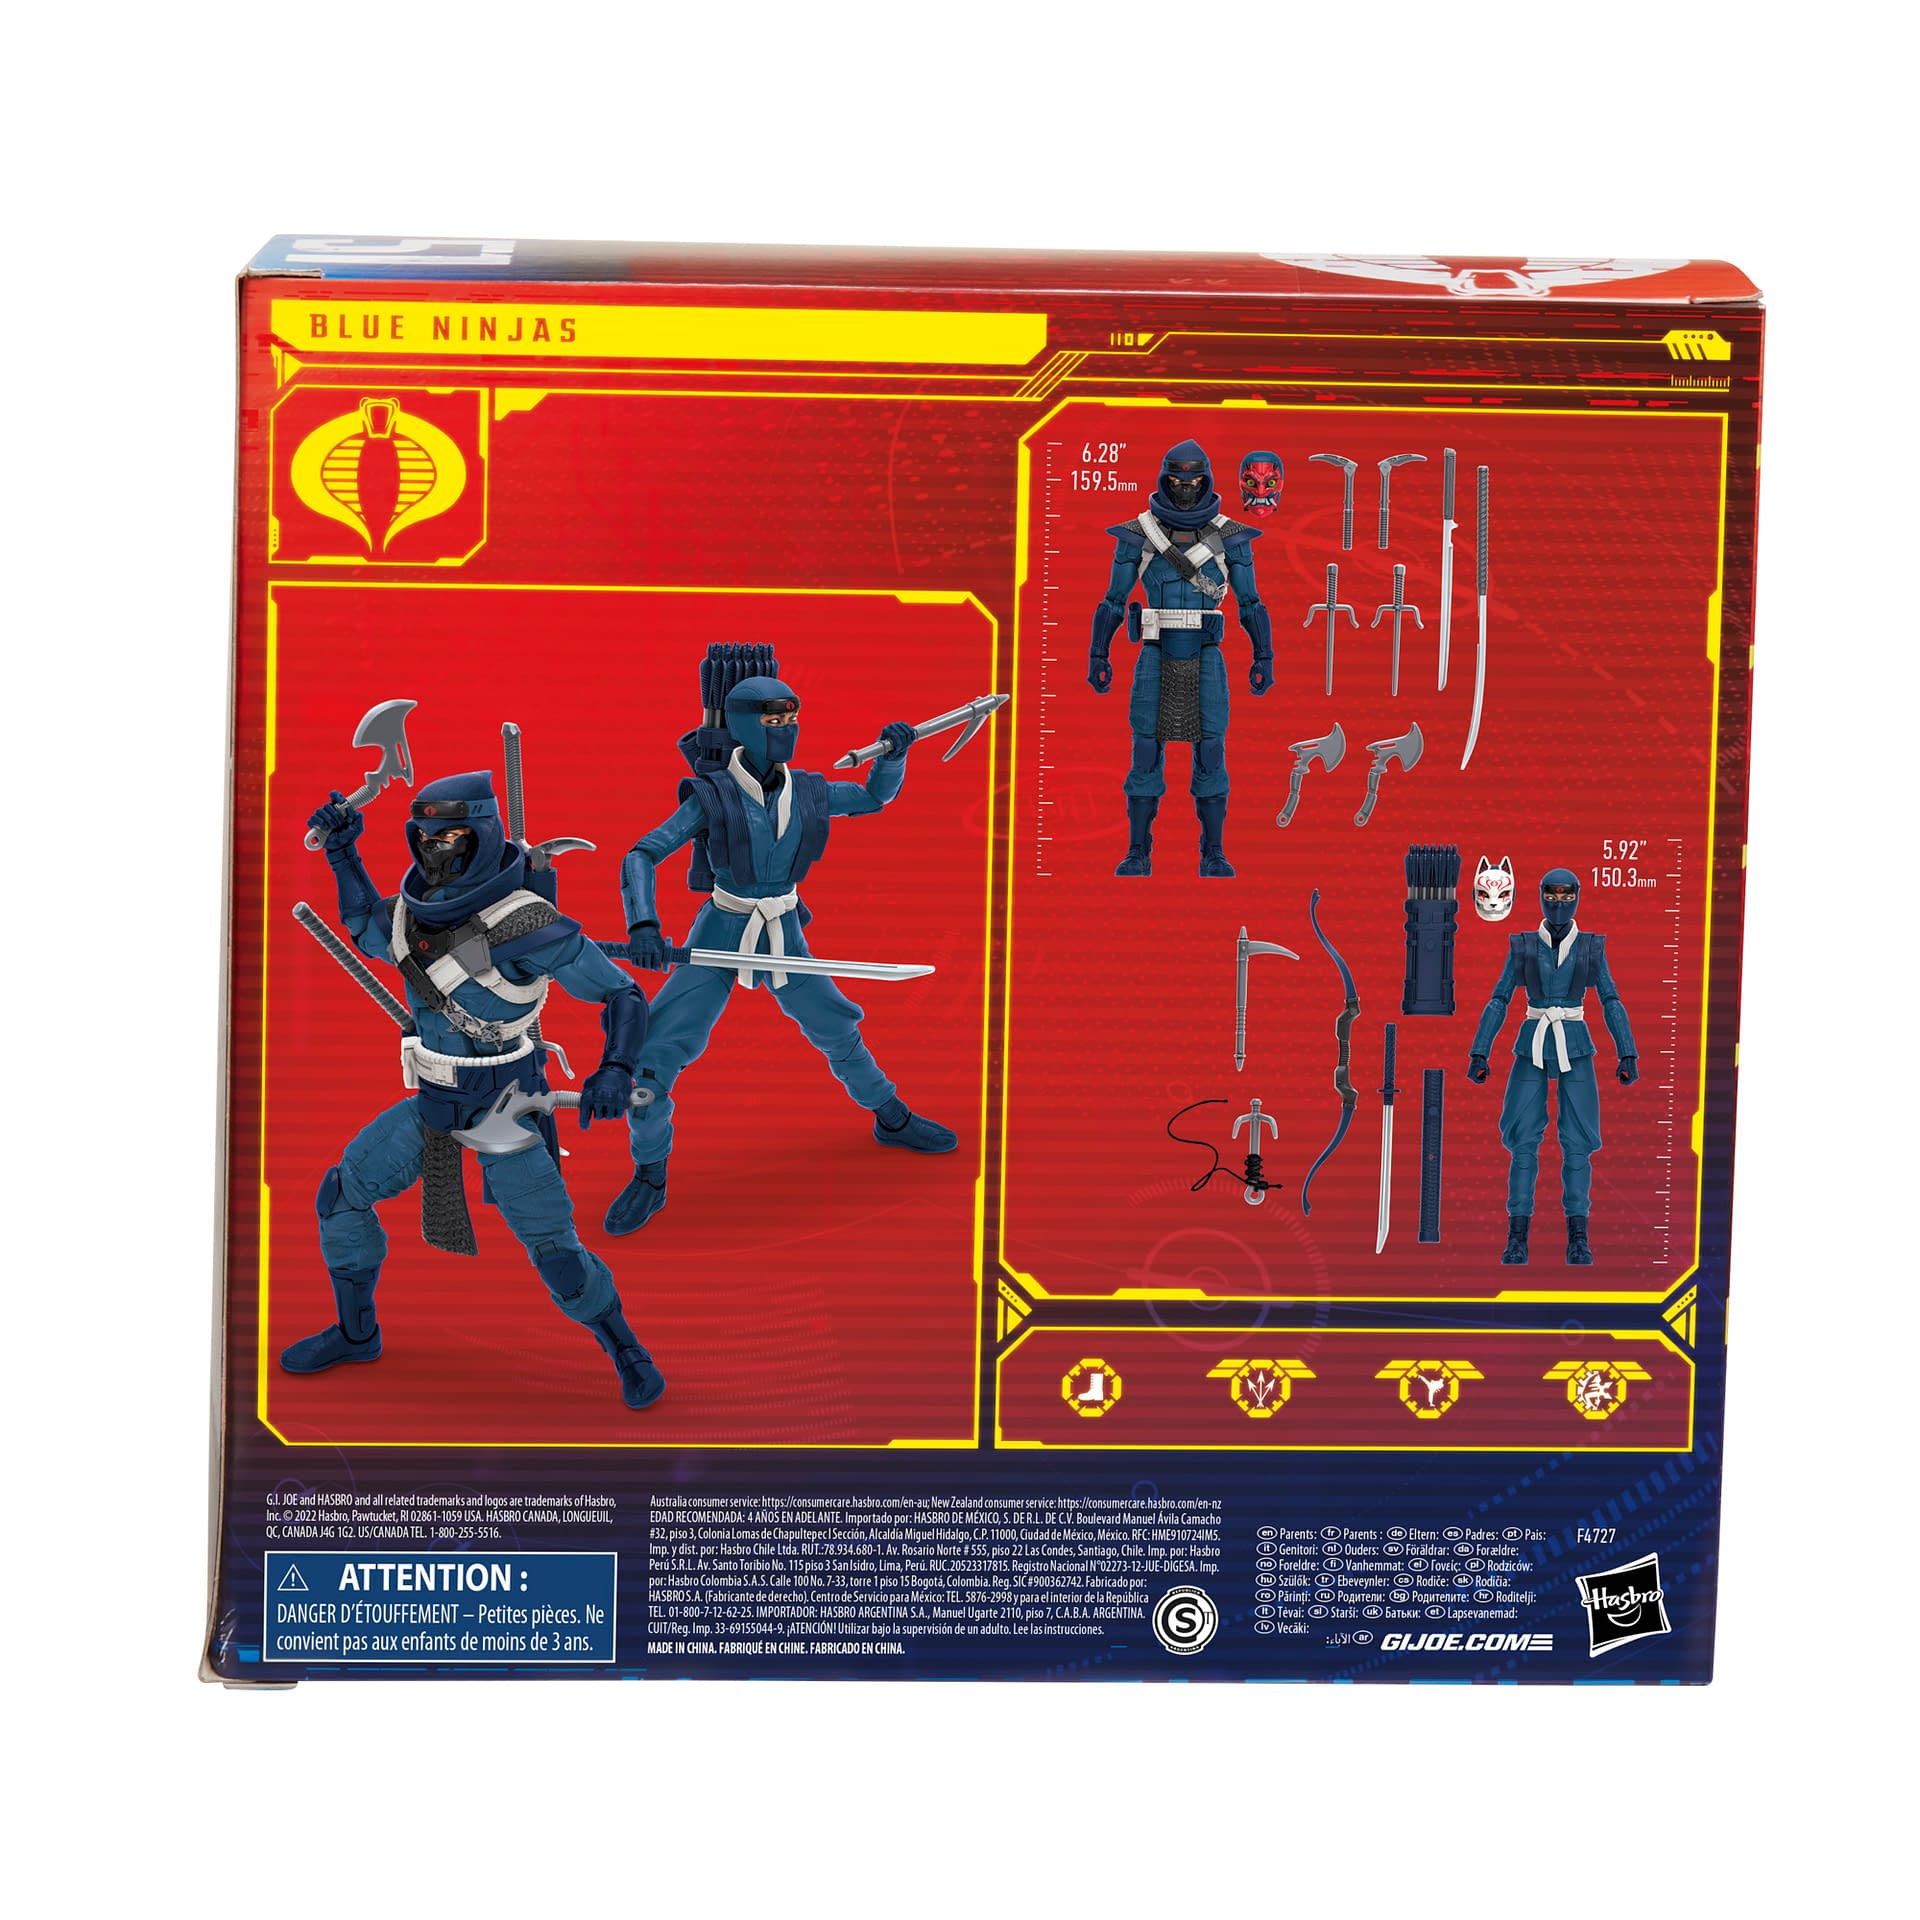 GI Joe Team Shows Off Two New Classified Figures Up For Order